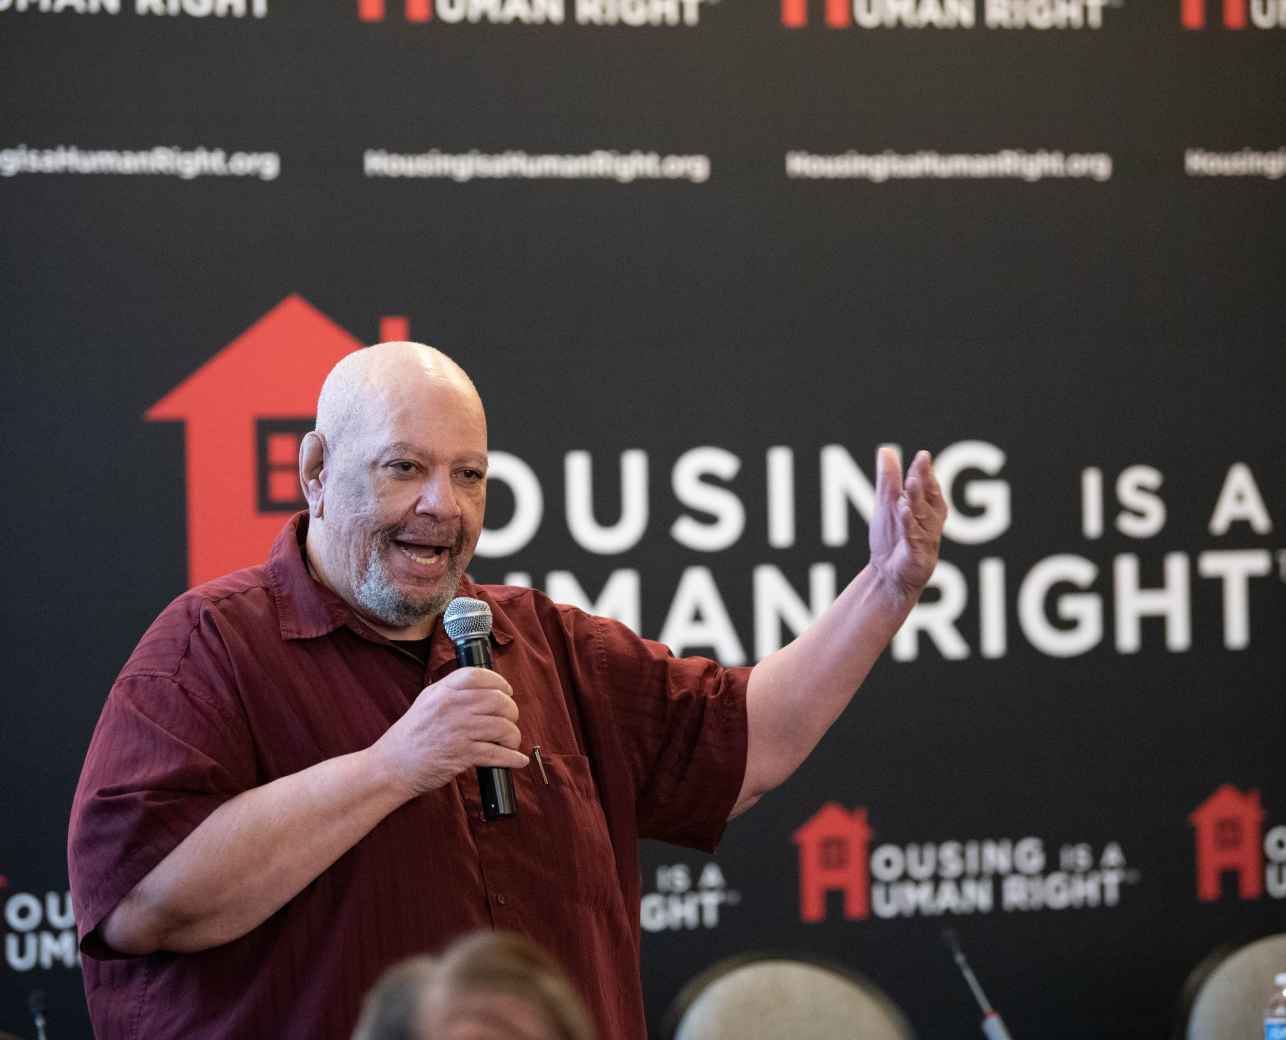 An advocate speaking at a Housing is a Human Right event